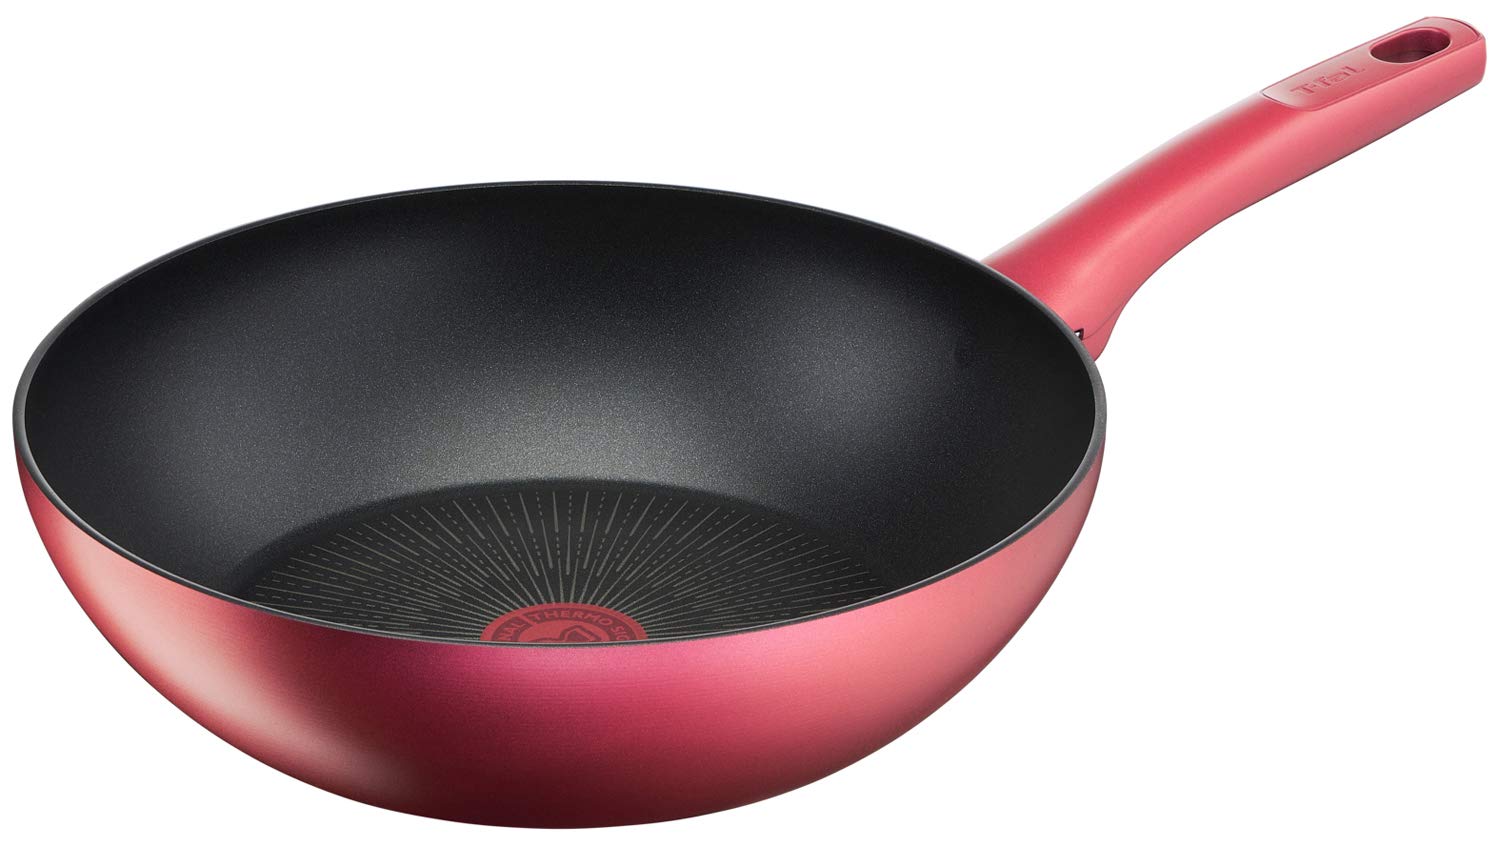 (T-fal) T-fal G26219 IH Rouge Unlimited Wok Pan, 11.0 inches (28 cm), Deep Type, Compatible with Induction and Gas Stoves, Non-Stick, Re